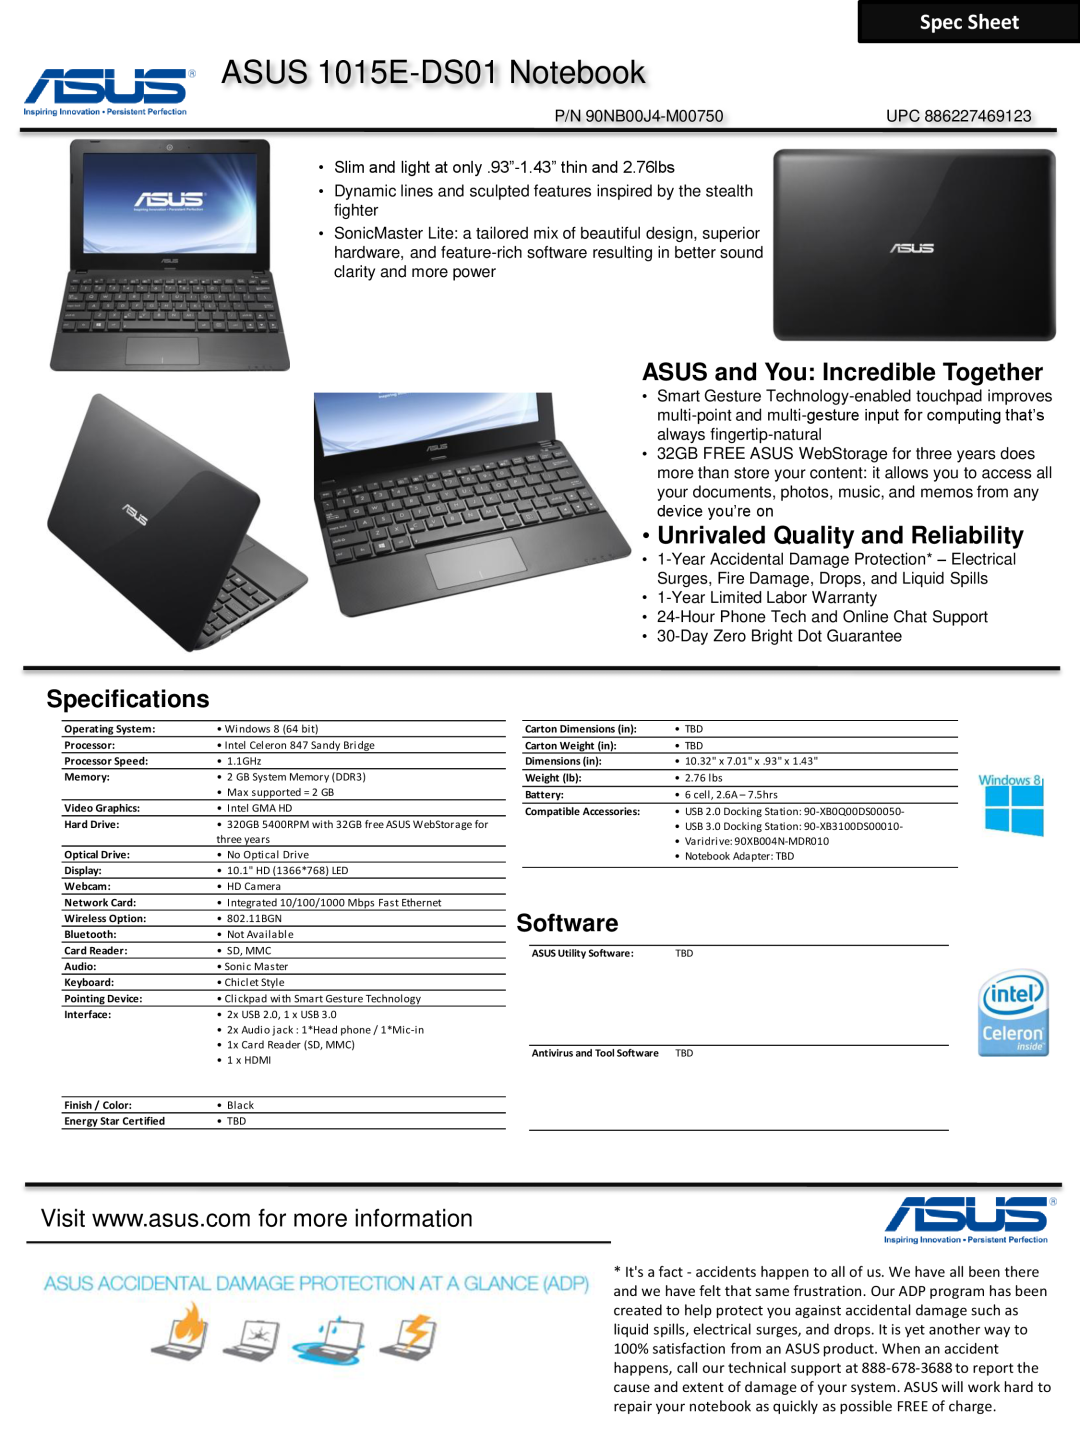 Asus 1015EDS01 specifications ASUS 1015E-DS01 Notebook, ASUS and You Incredible Together, Specifications, Software 